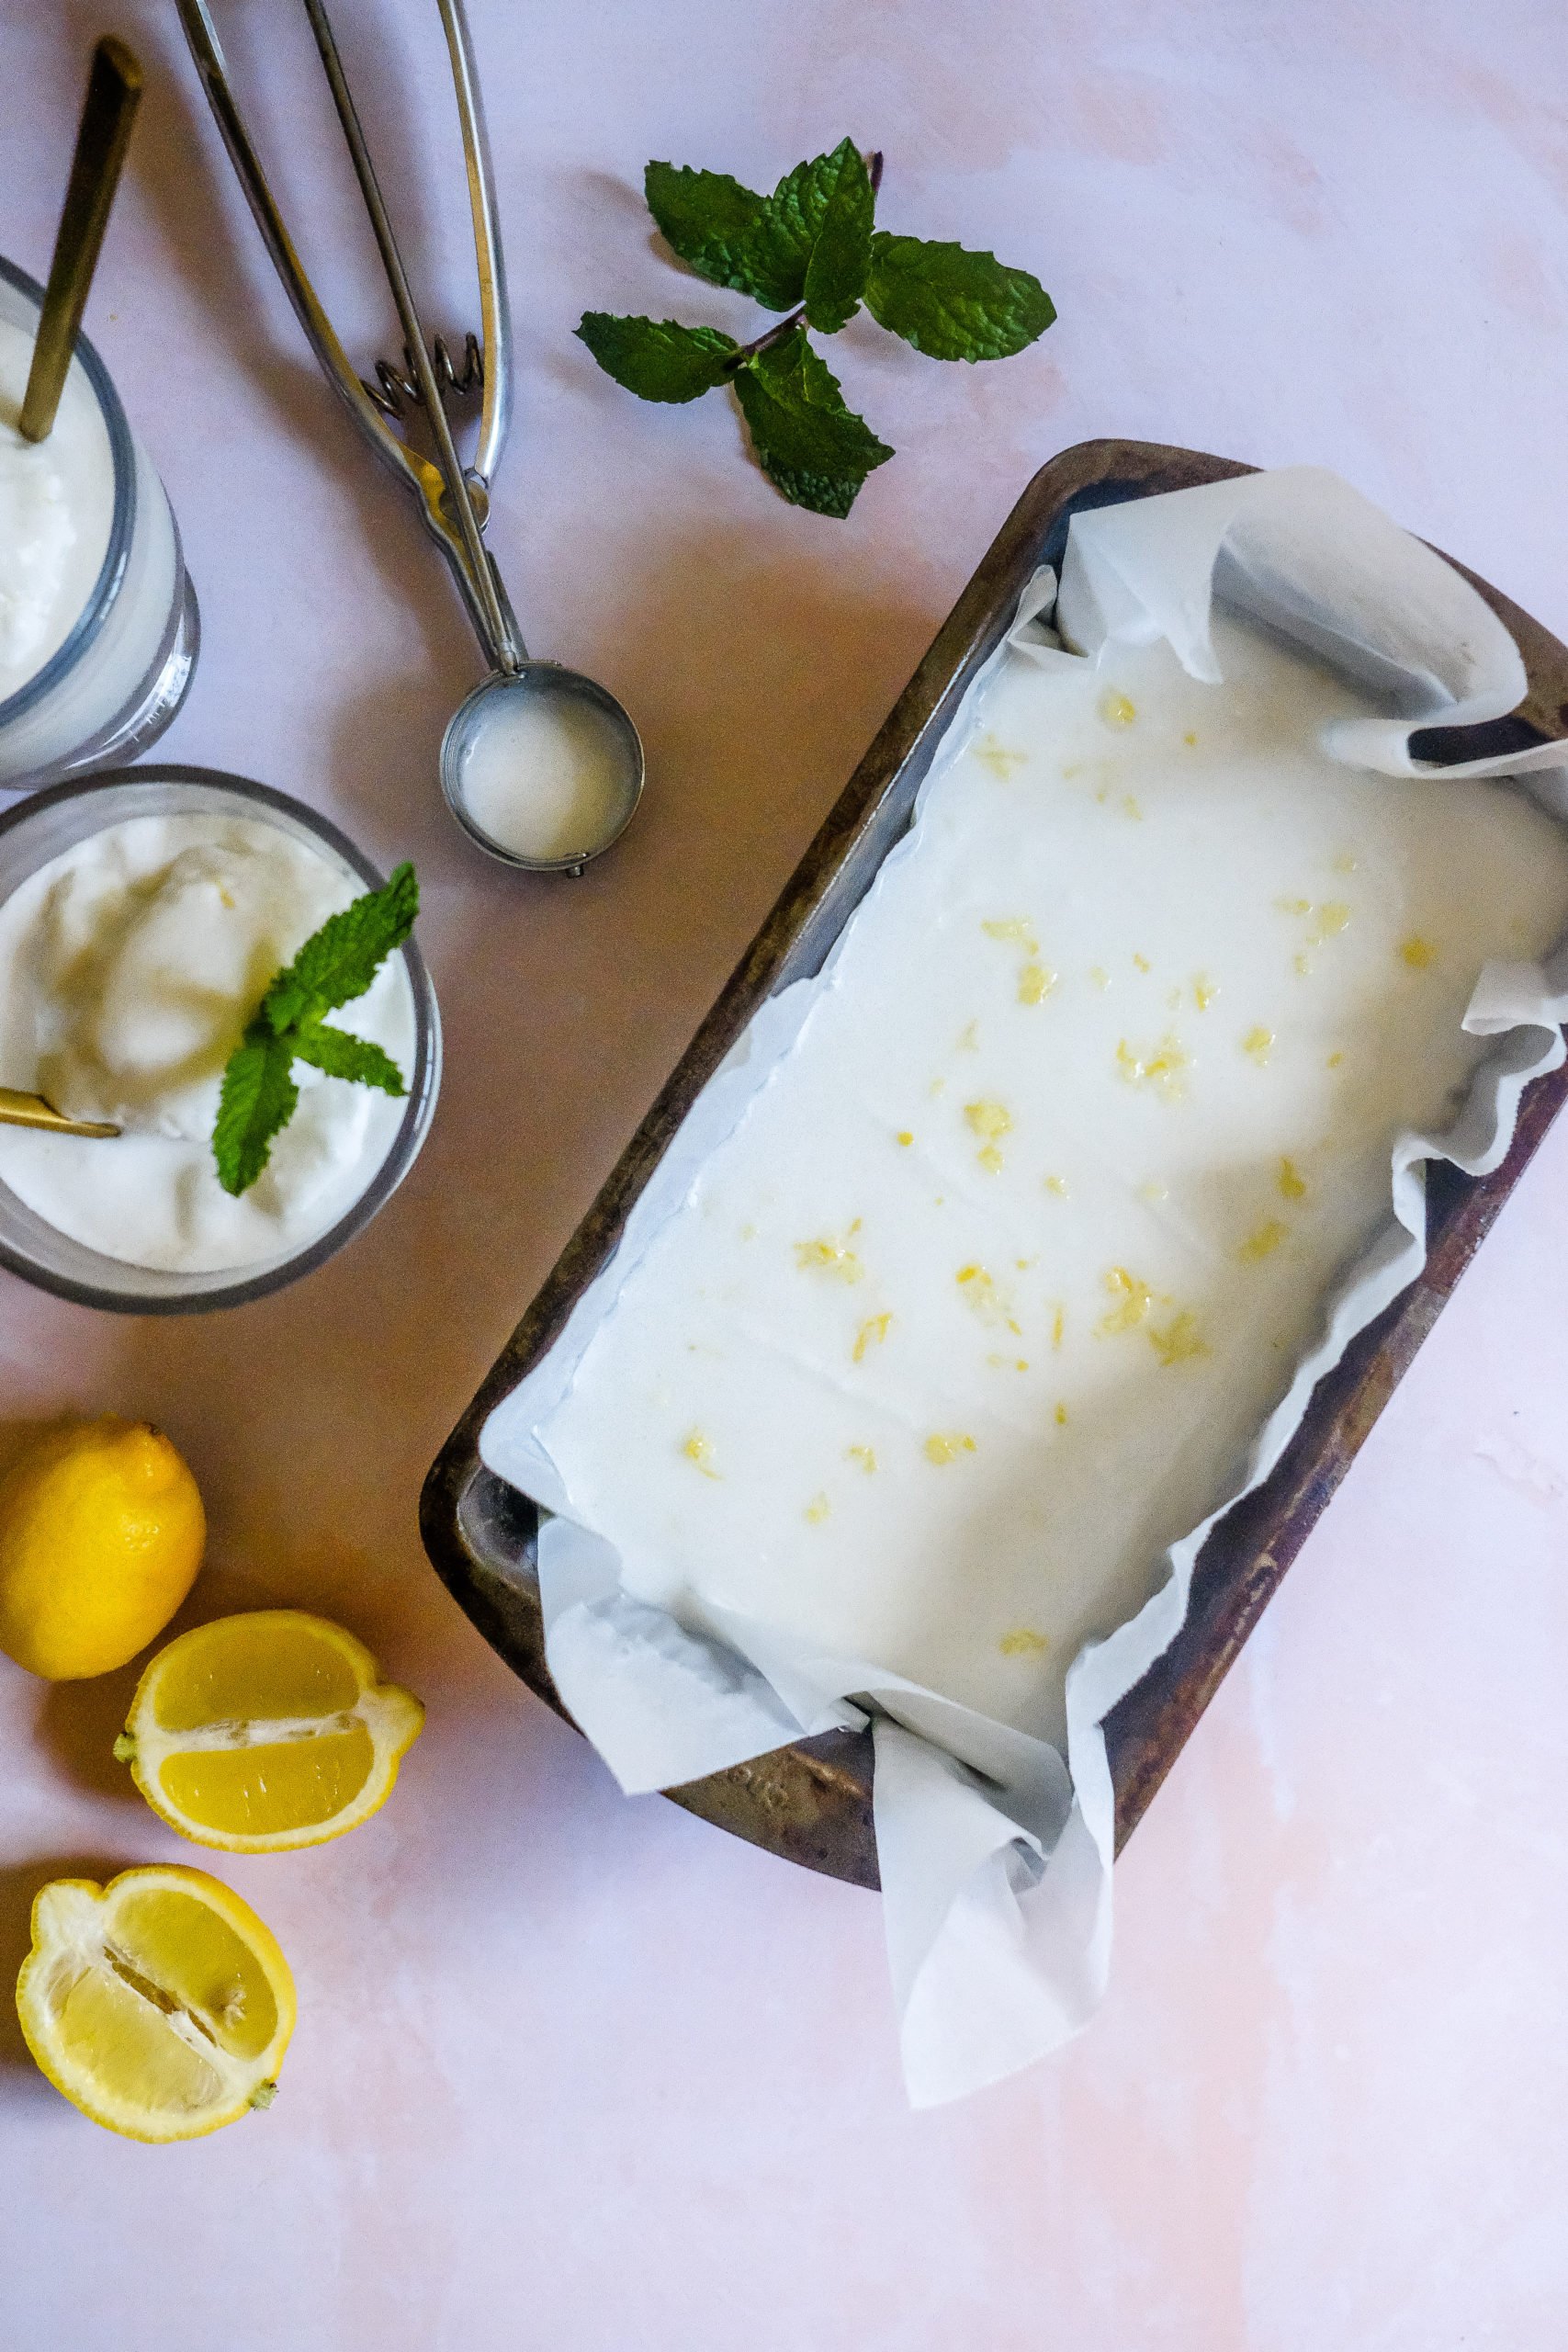 Chocolate & Lace shares her recipe for homemade Coconut Lemon Sorbet